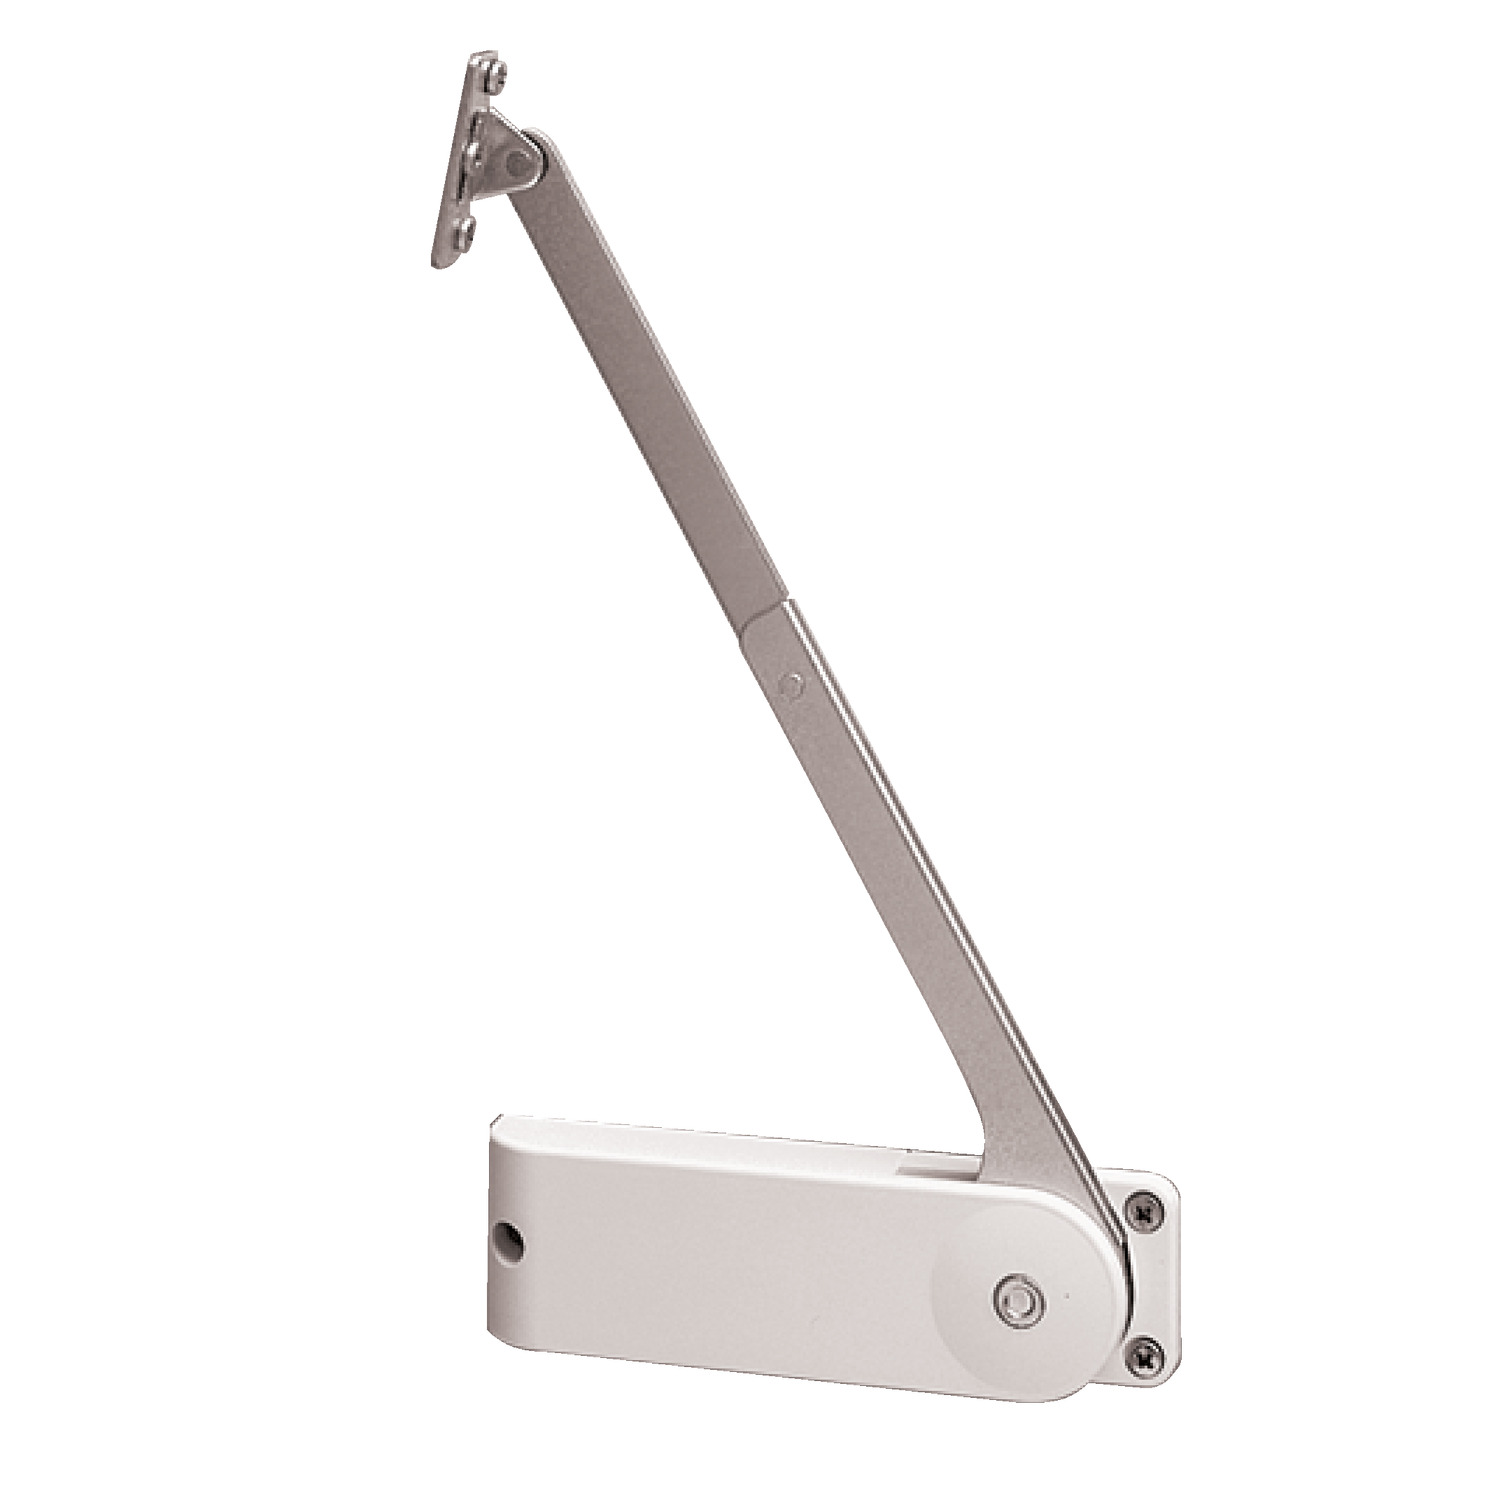 N0440.AC0130 Heavy Duty Soft-Close Stays For top opening lid, 70deg.  opening angle. Right - Heavy duty